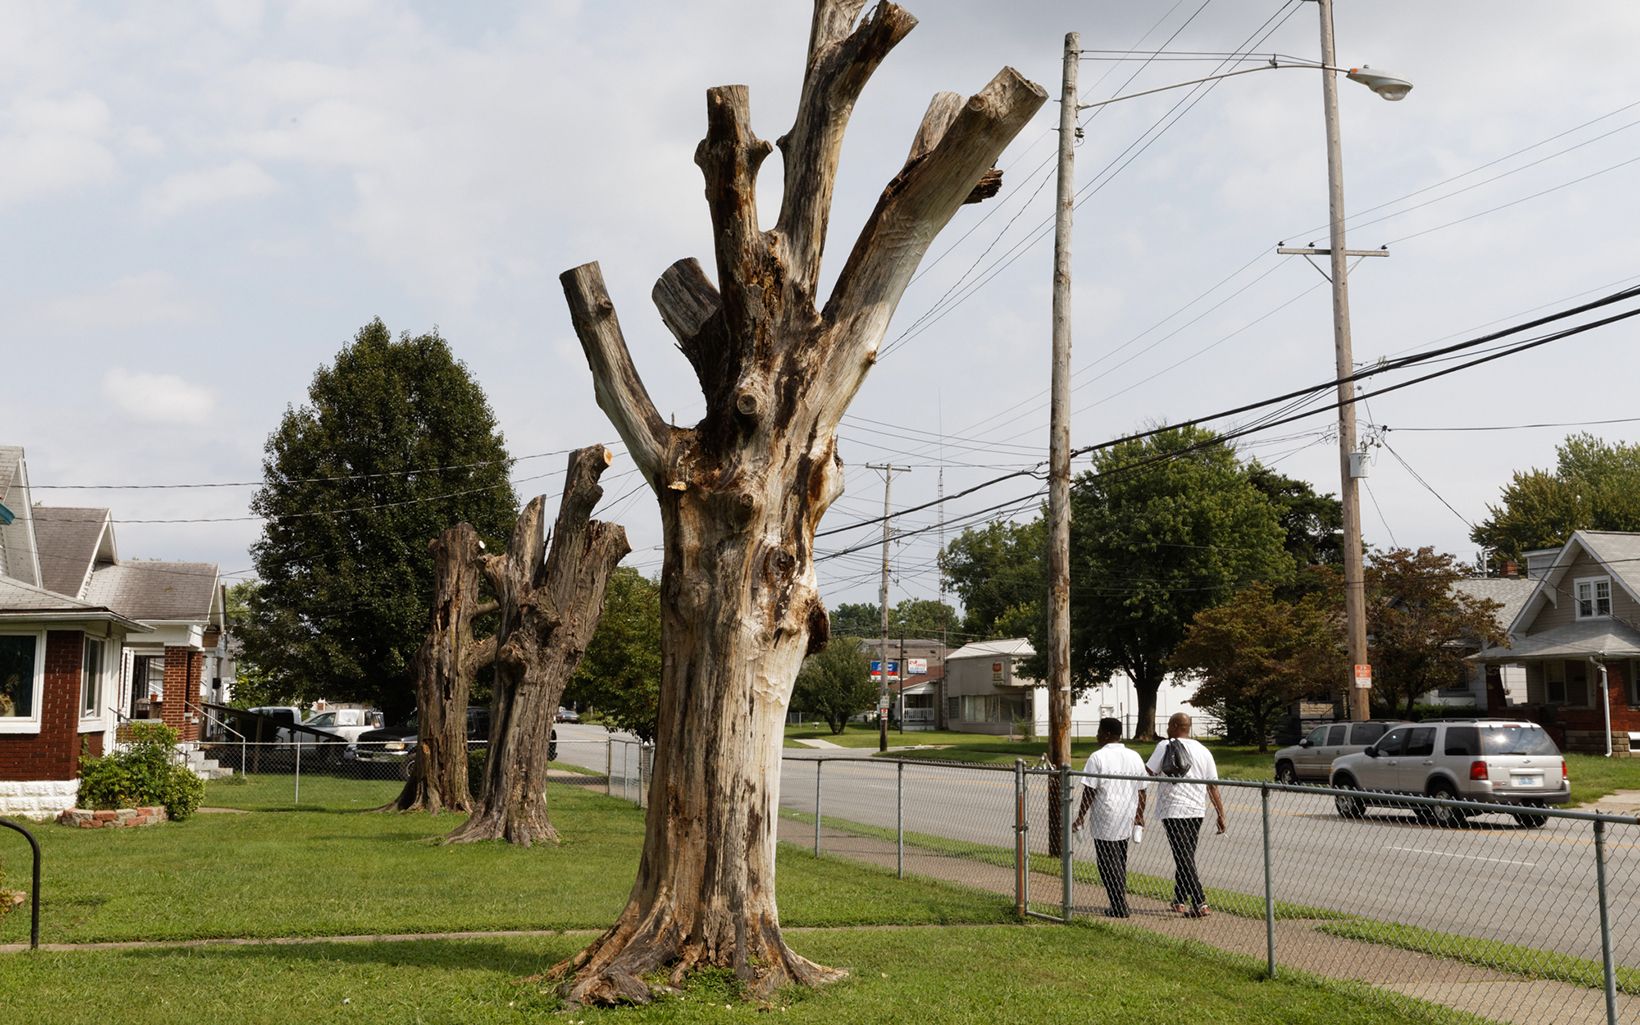 
                
                  Beach Avenue, Louisville. One of three dead trees on Beach Avenue in South Louisville. Storms, development and insect pests like emerald ash borer result in the loss of 150 trees per day in Louisville.
                  © Randy Olsen/The Nature Conservancy
                
              